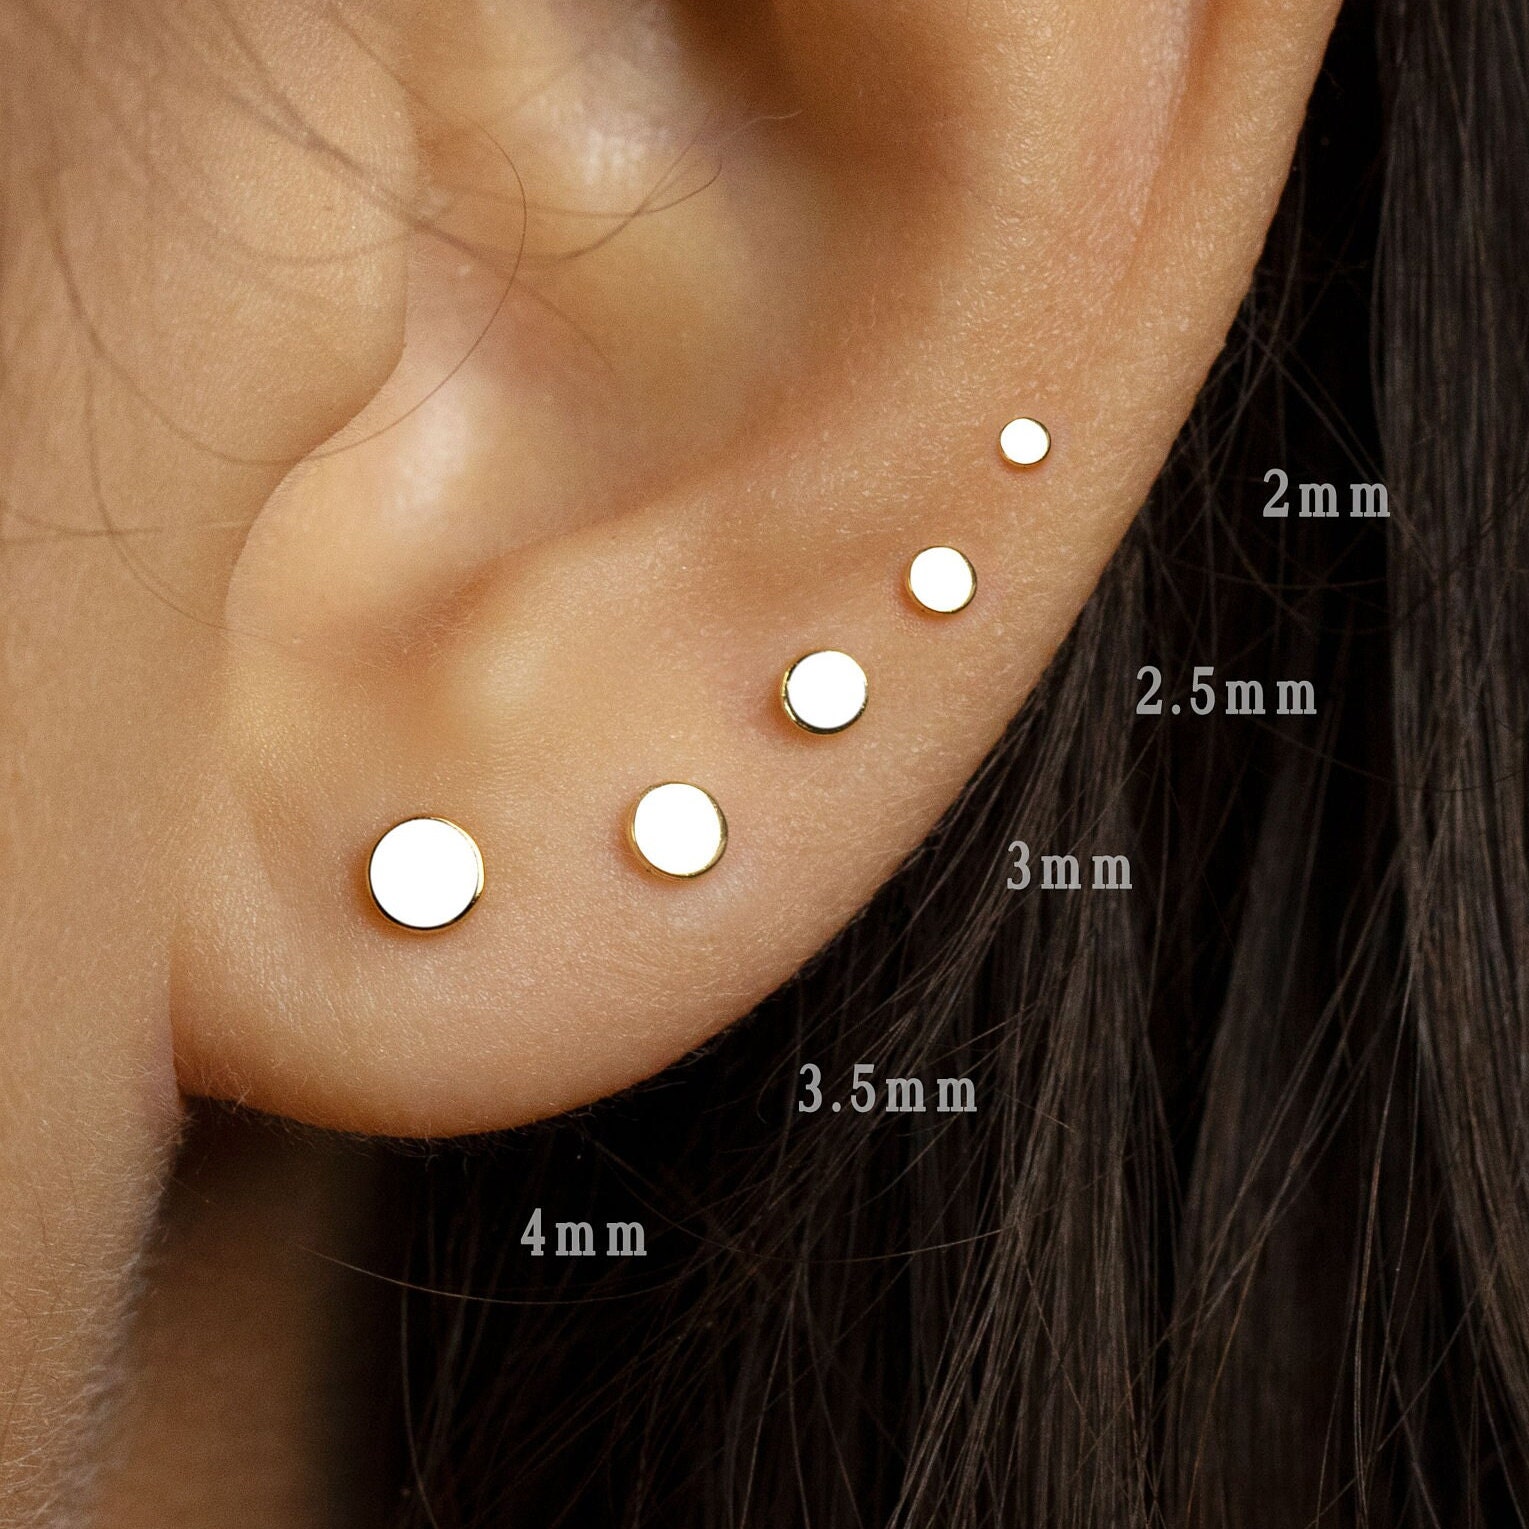 2.5mm Tiny Disc 14K Gold Labret Tragus Cartilage Flat Back Earring White / 16g 5/16 Quality Jewelry Made in USA